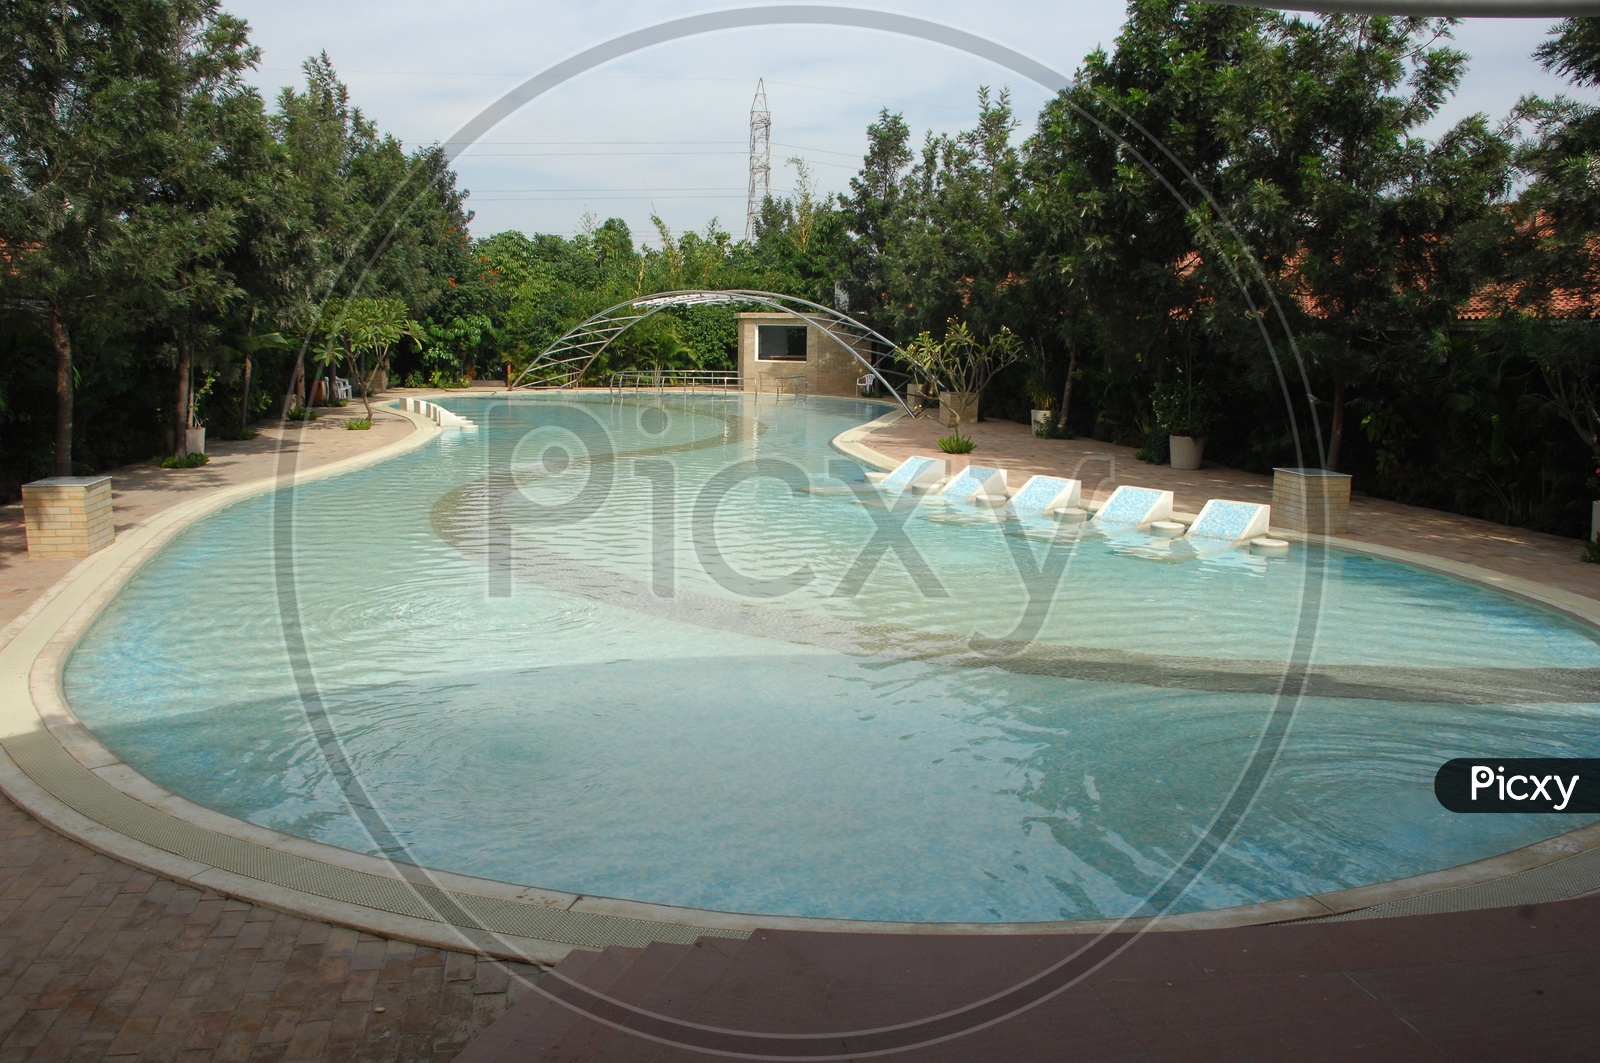 Swimming pool with an arch bridge in between